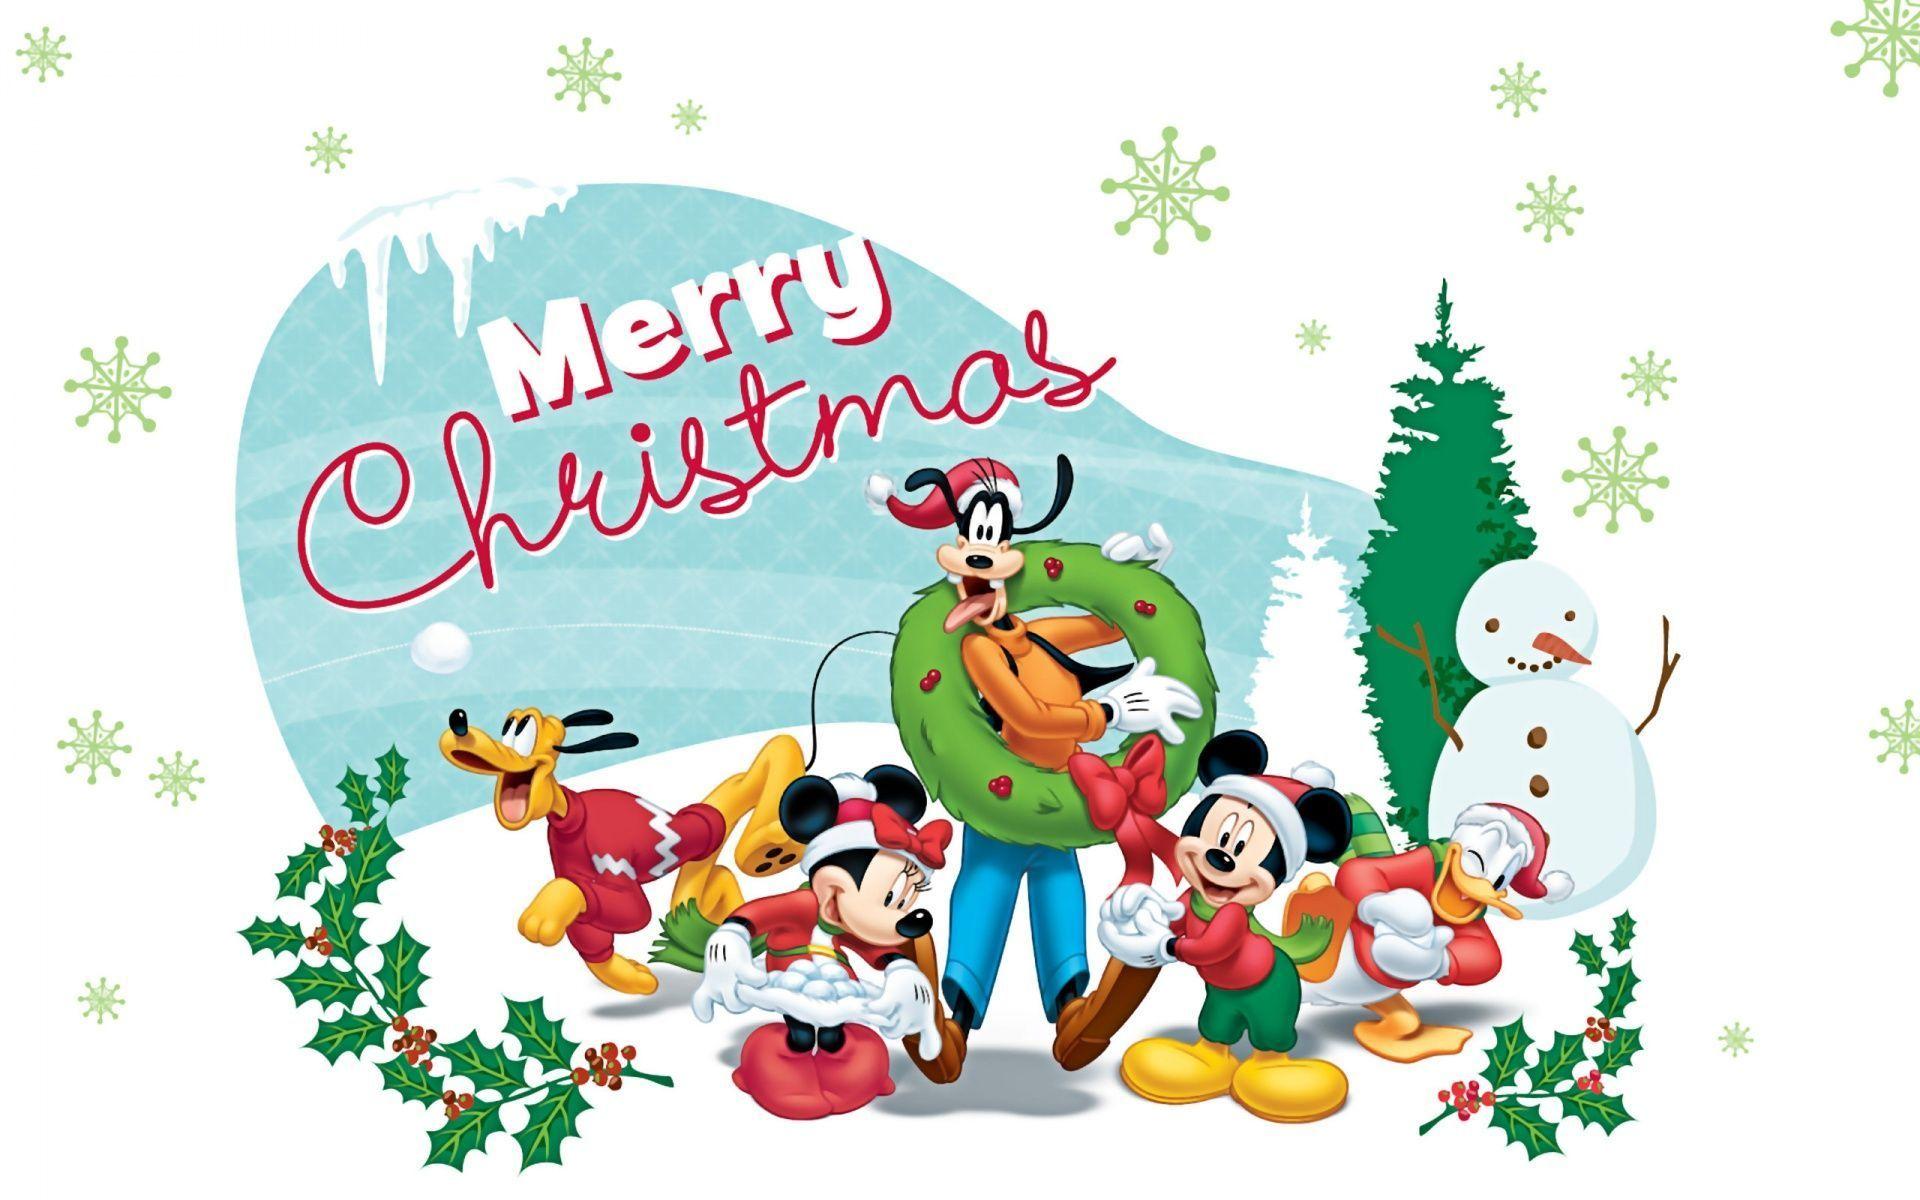 Disney wallpaper at Christmas time all in HD from Donald to mickey